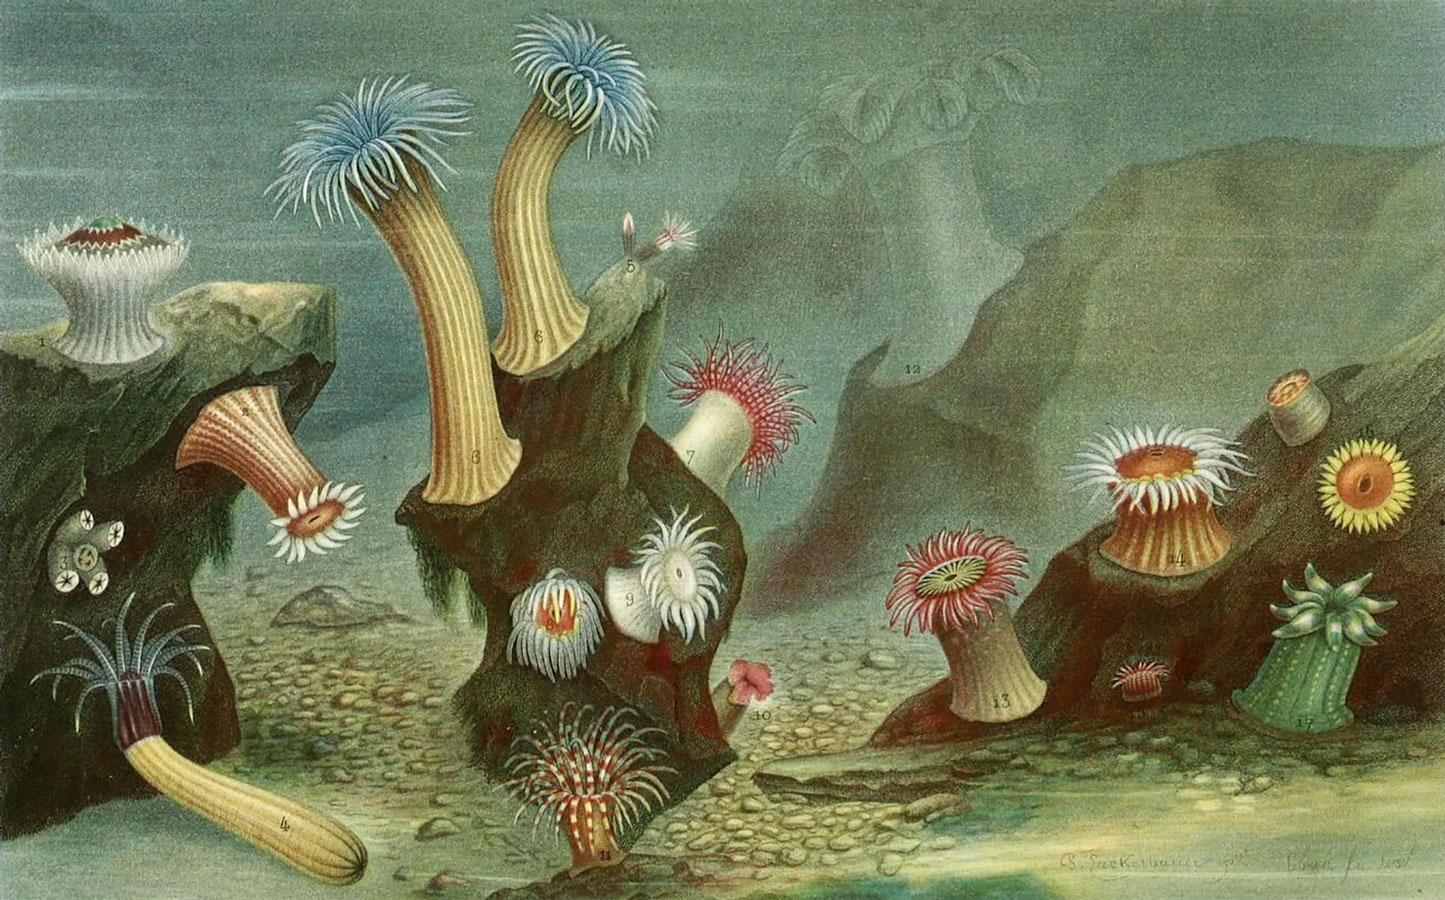 Anémonas marinas, en Alfred Moquin-Tandon y Henry Martyn, _The World of the Sea_, 1869. Biodiversity Heritage Library